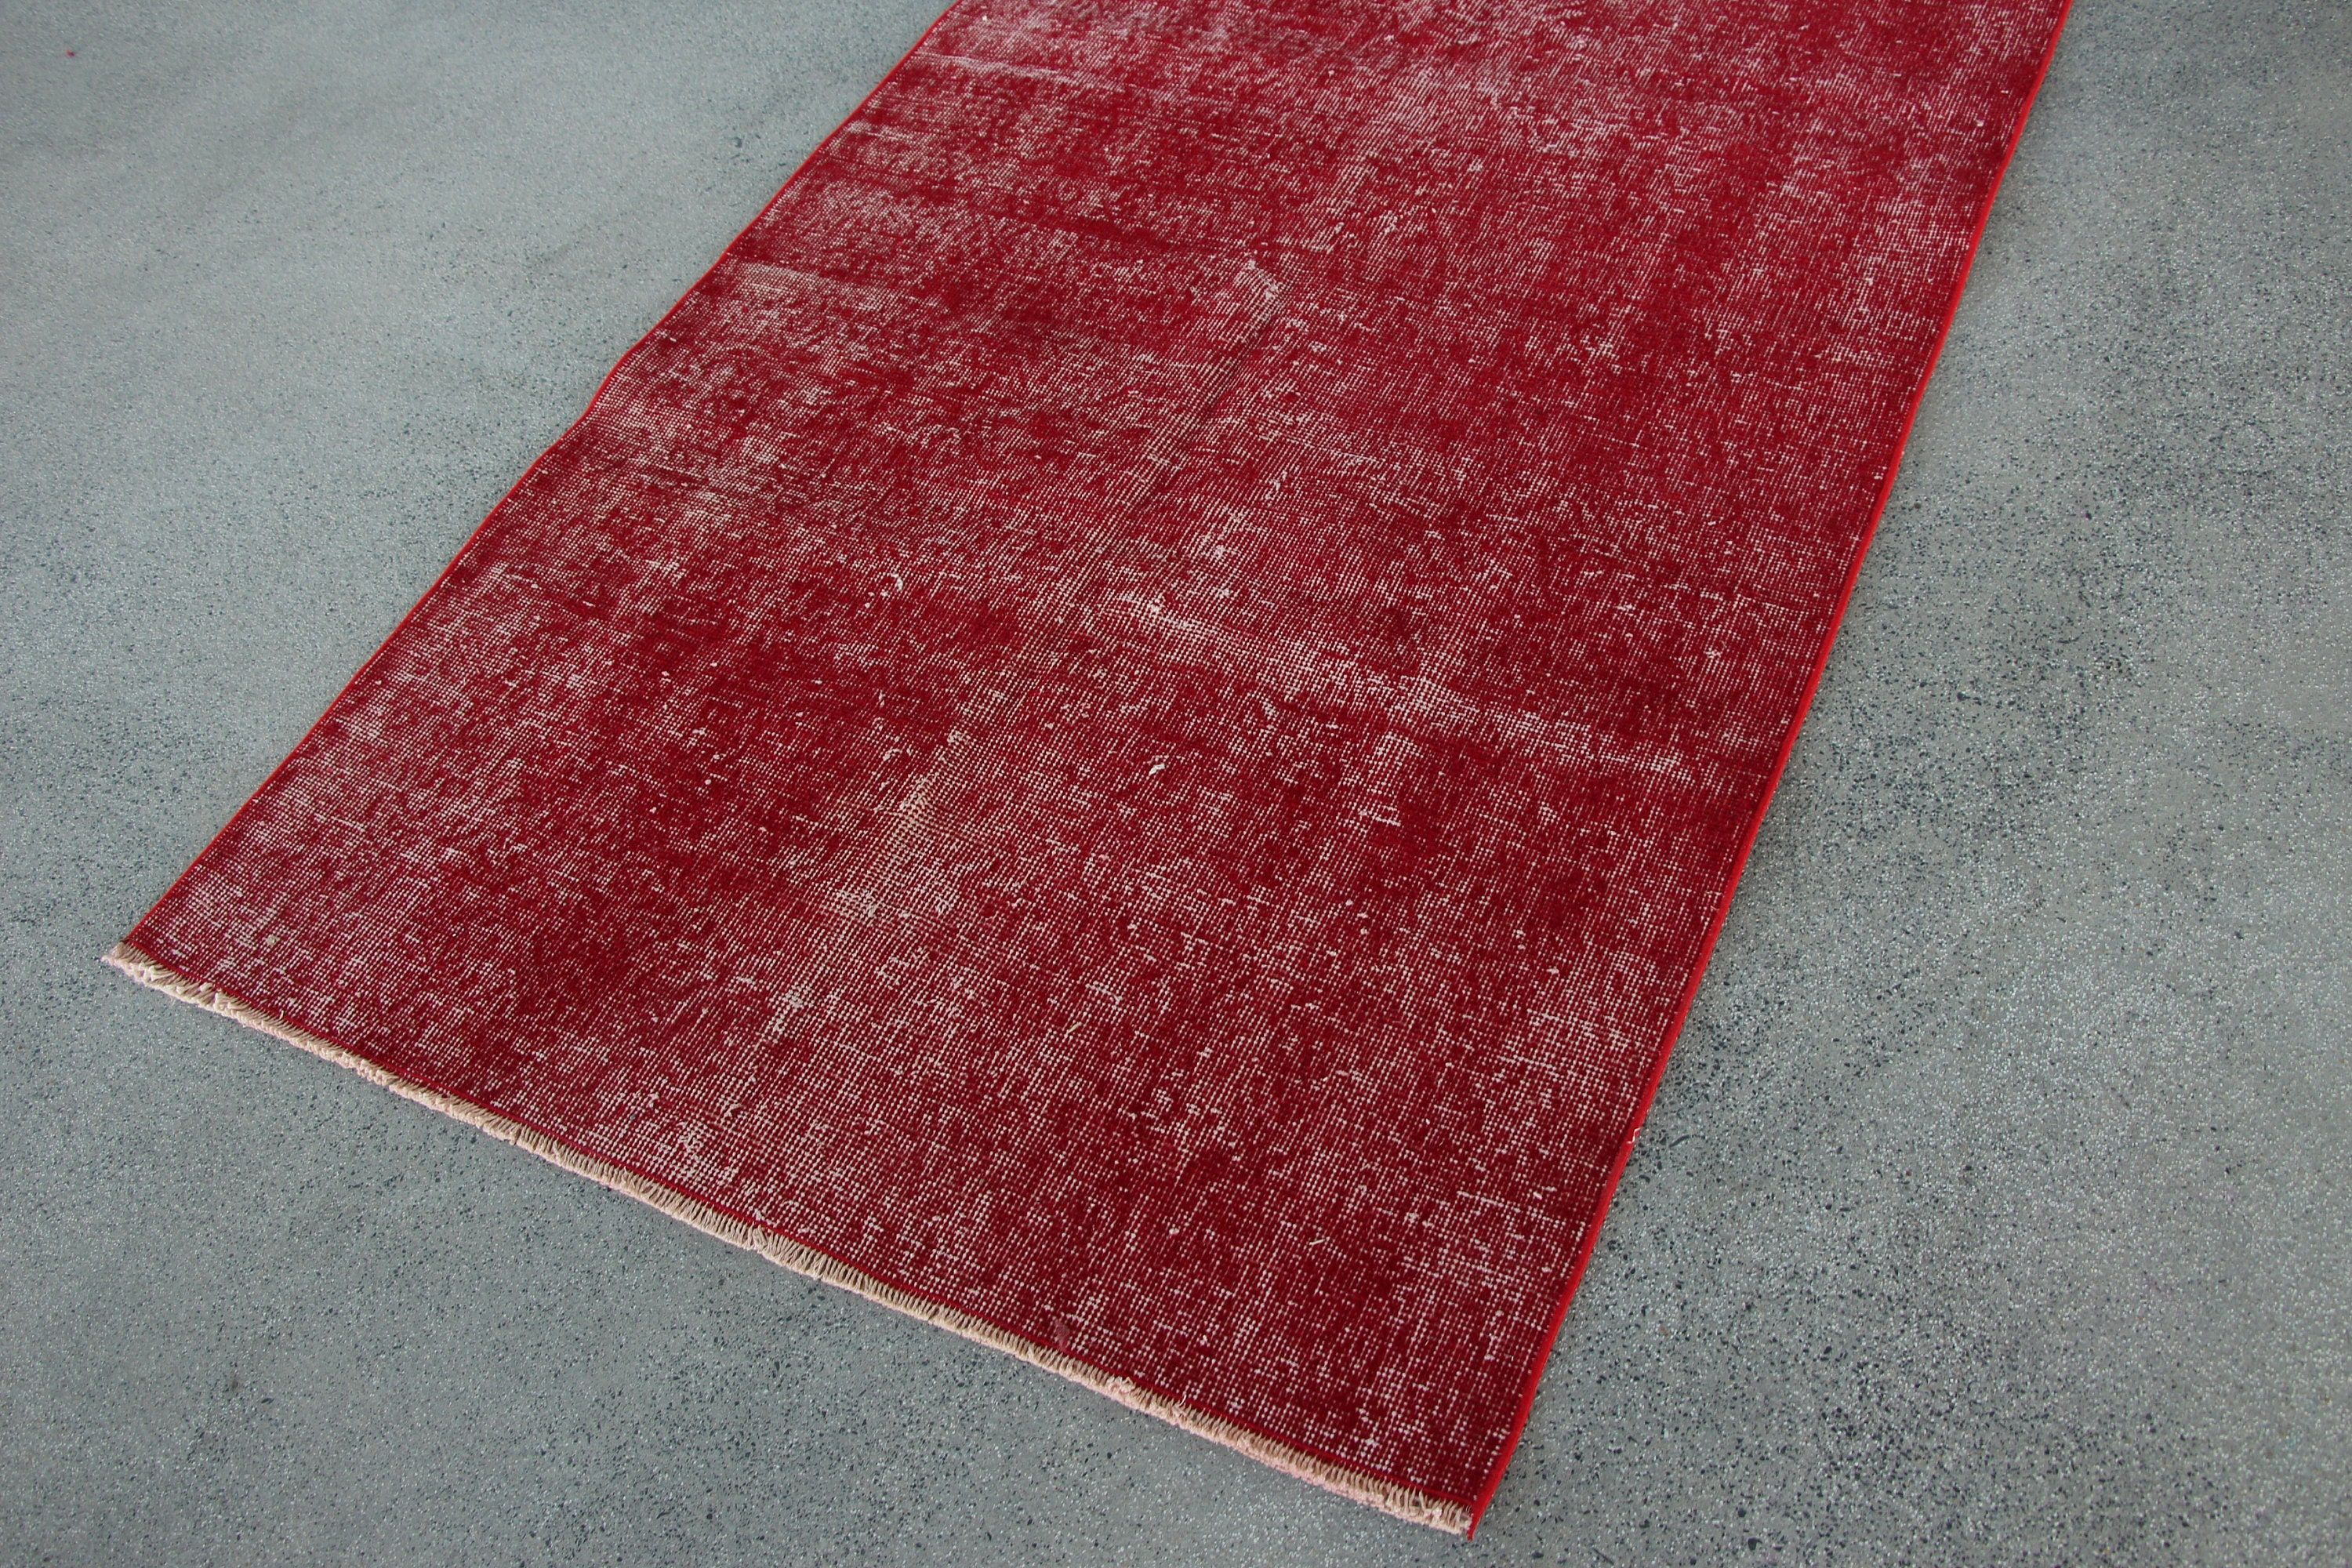 Wool Rug, Rugs for Area, Floor Rugs, Kitchen Rugs, 3.7x6.8 ft Area Rug, Vintage Rug, Red Anatolian Rugs, Turkish Rug, Home Decor Rugs